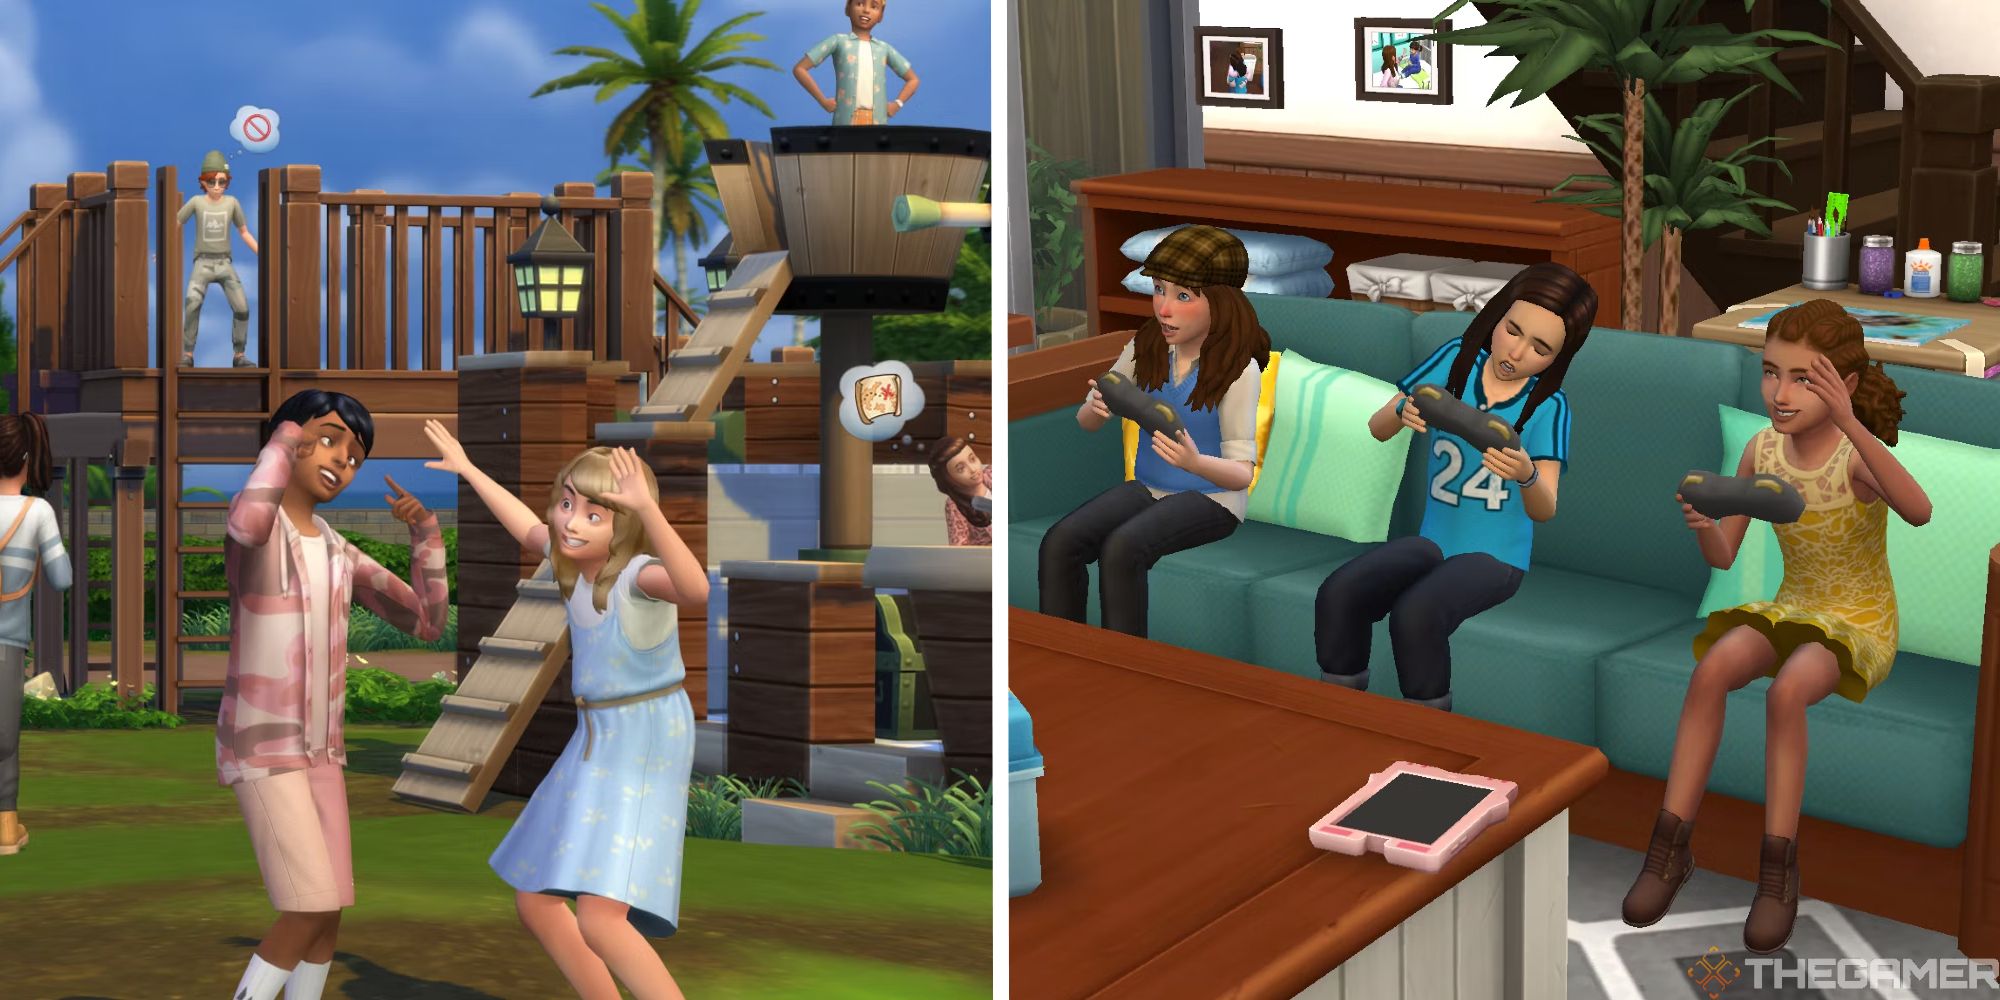 sims 4 split image showing children at playground next to image of children playing video games on a couch